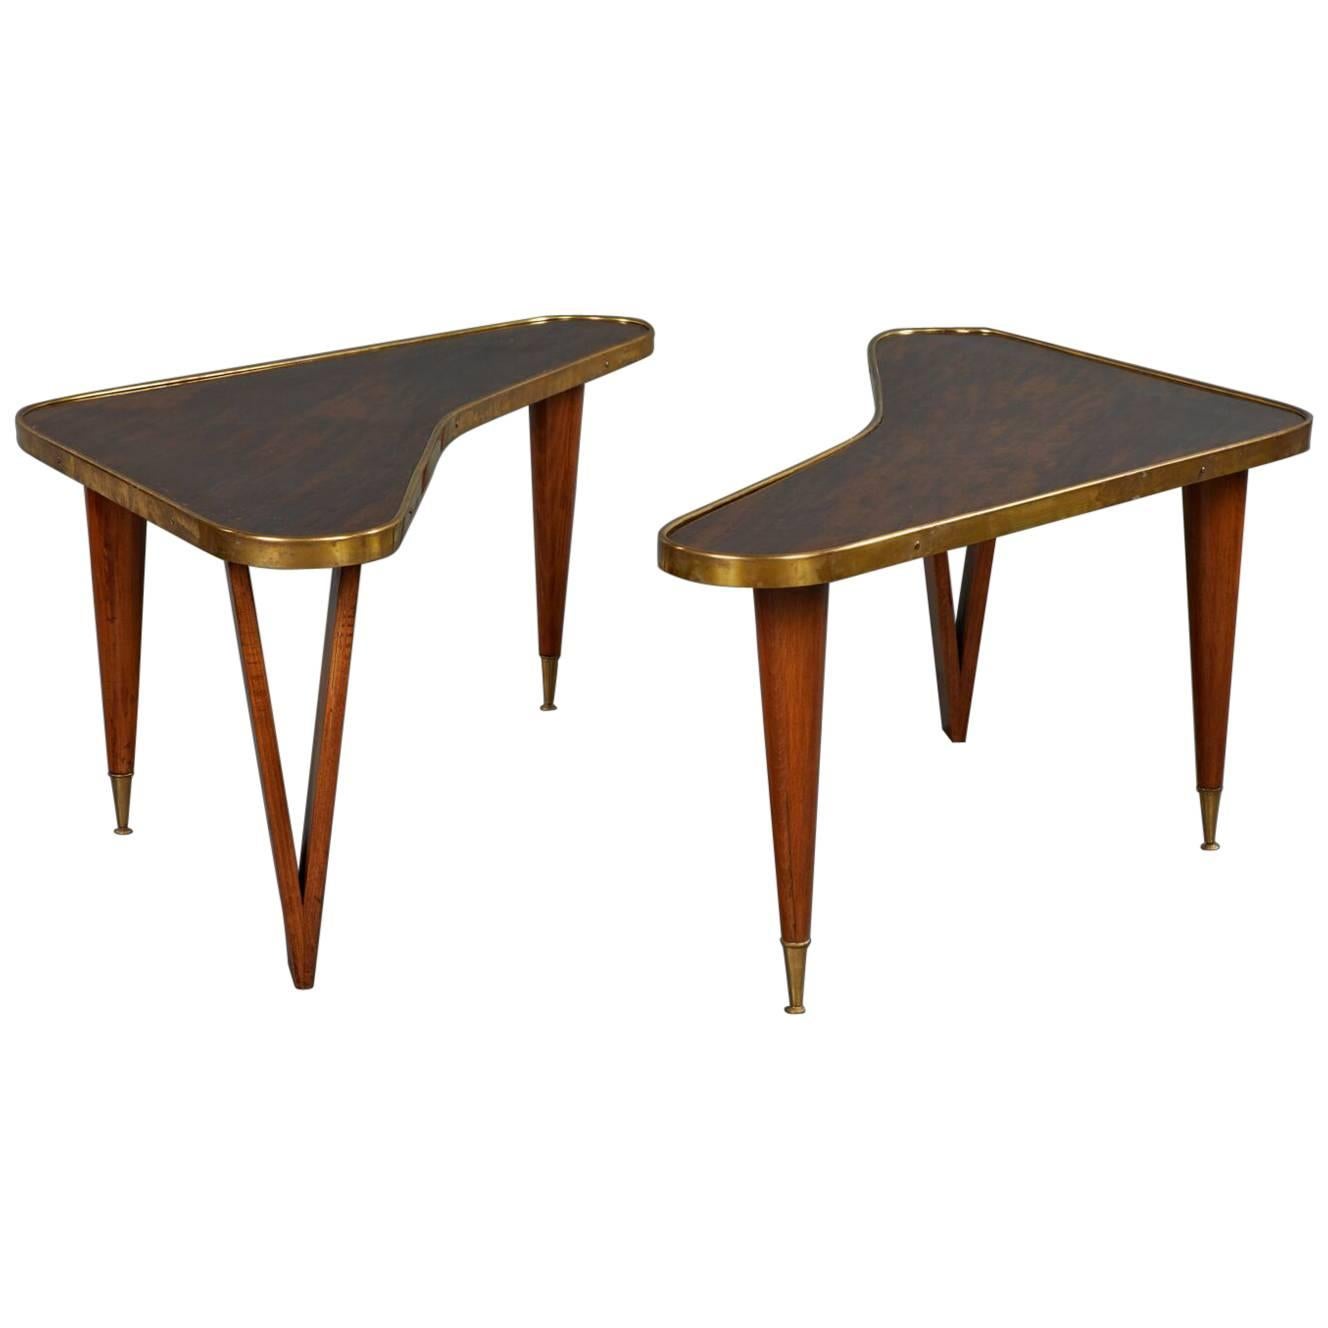 Pair of Biomorphic Rosewood Coffee Tables